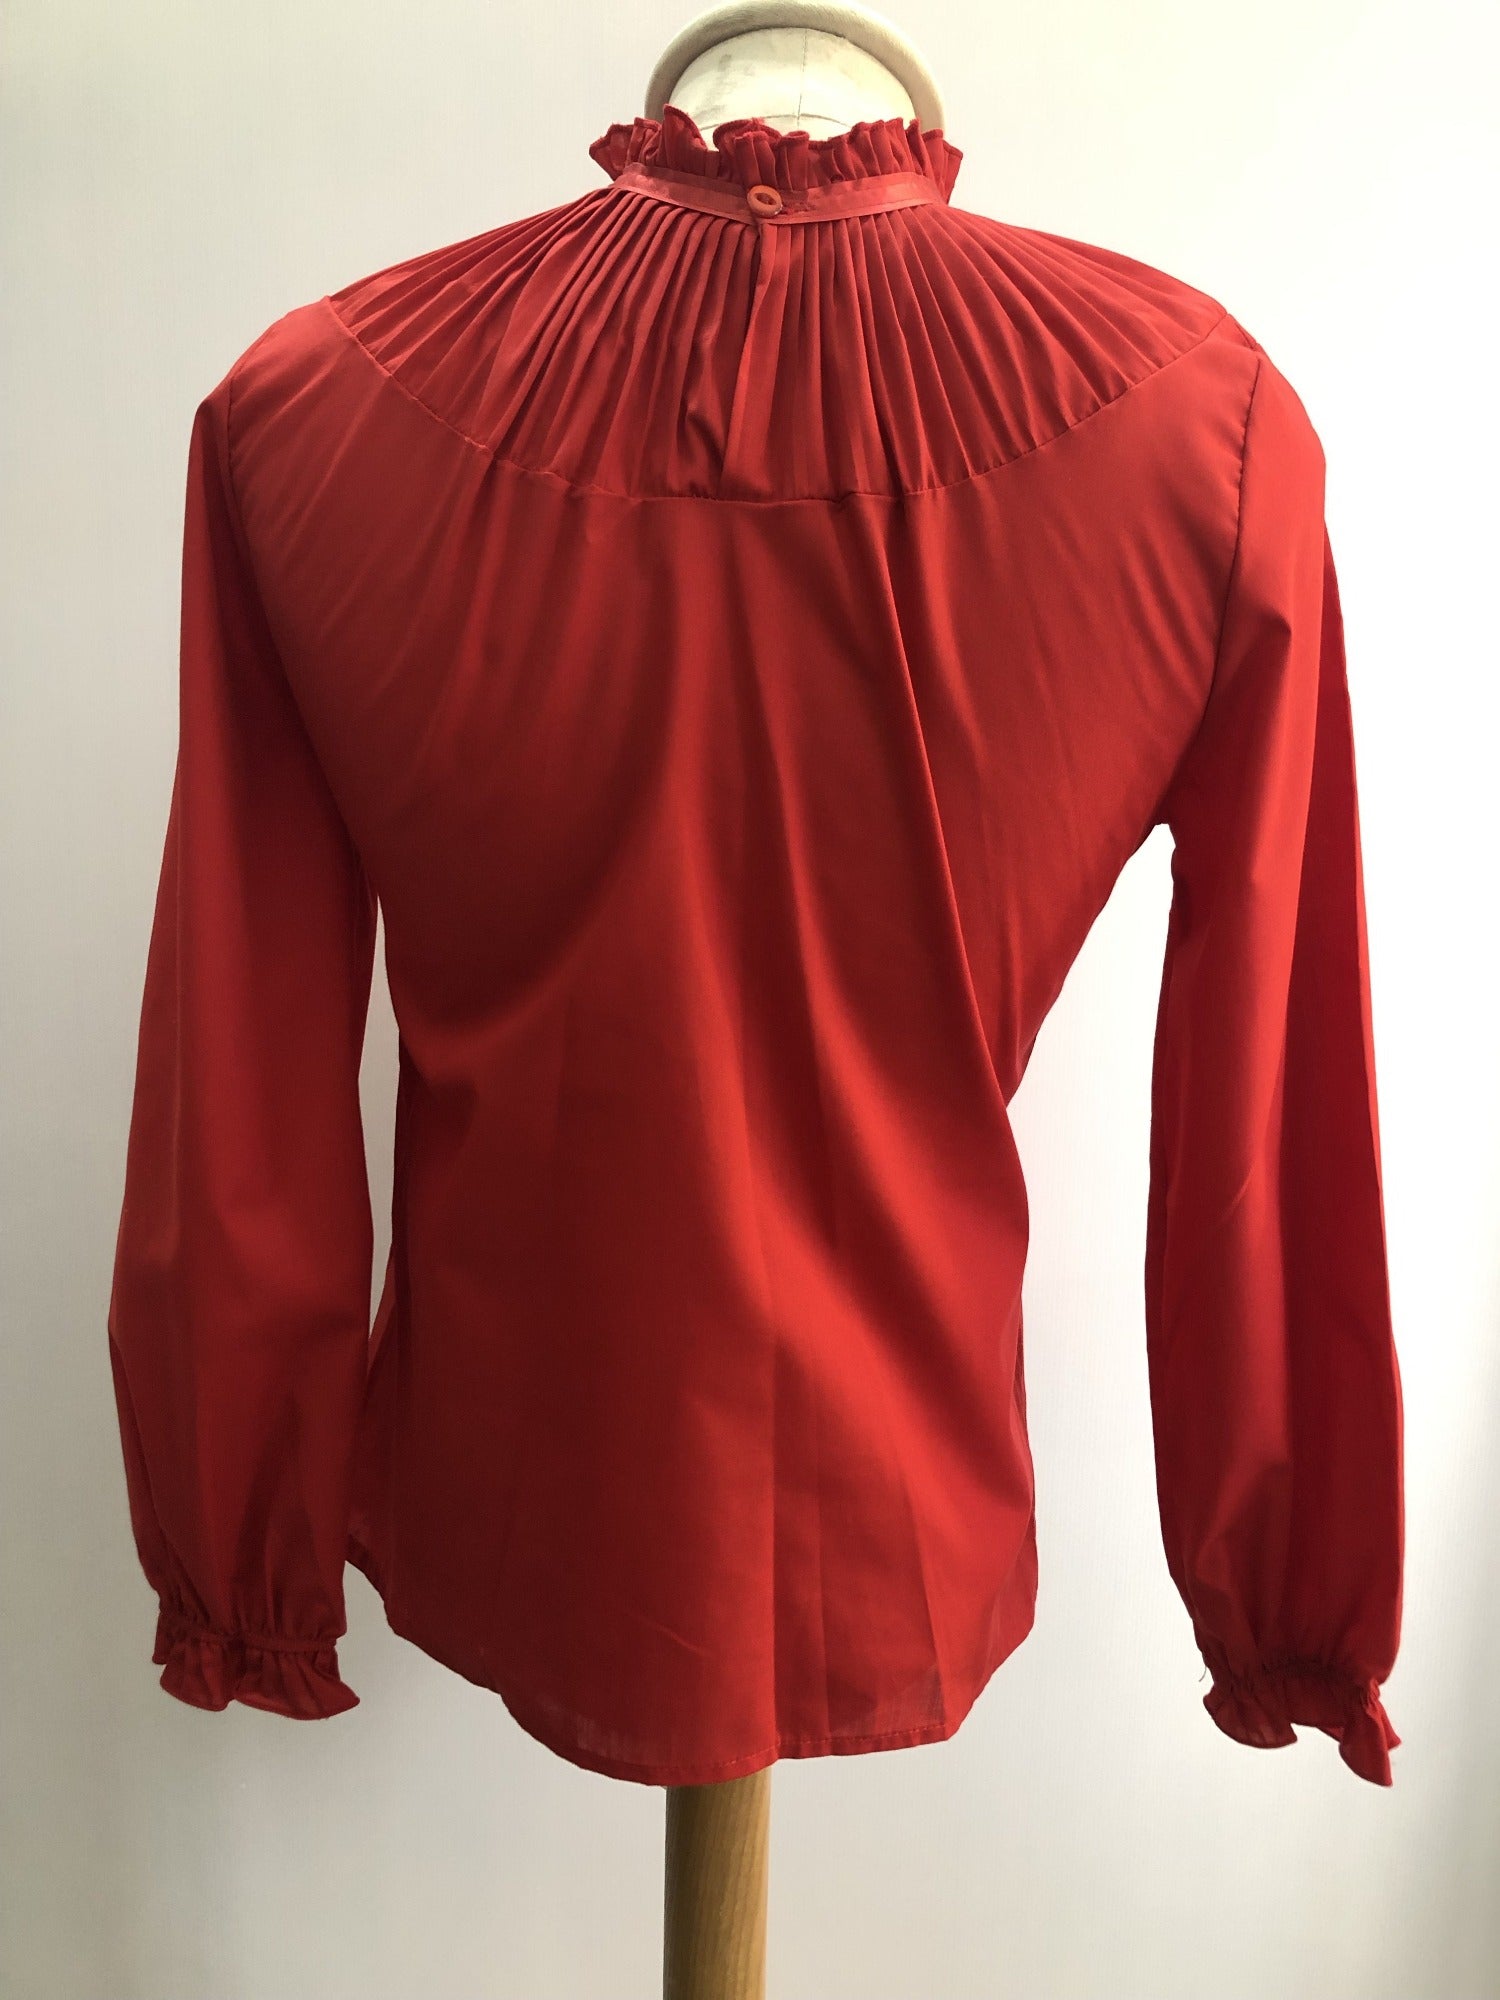 womens  vintage  Urban Village Vintage  top  ruffle sleeves  ruffle neck  red  high neck  blouse  beagle collar  70s  1970s  10